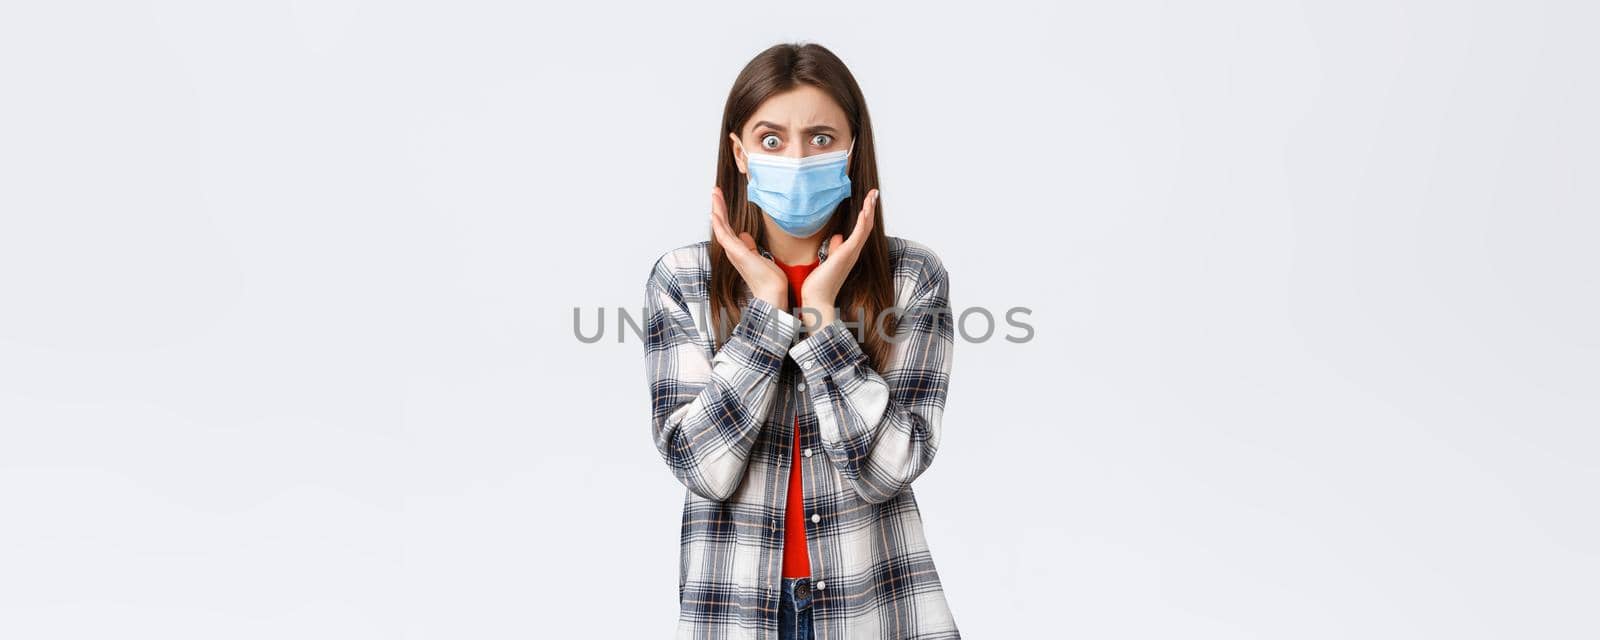 Coronavirus outbreak, leisure on quarantine, social distancing and emotions concept. Concerned and shocked young woman hear bad news. Girl in medical mask gasping and looking worried camera.